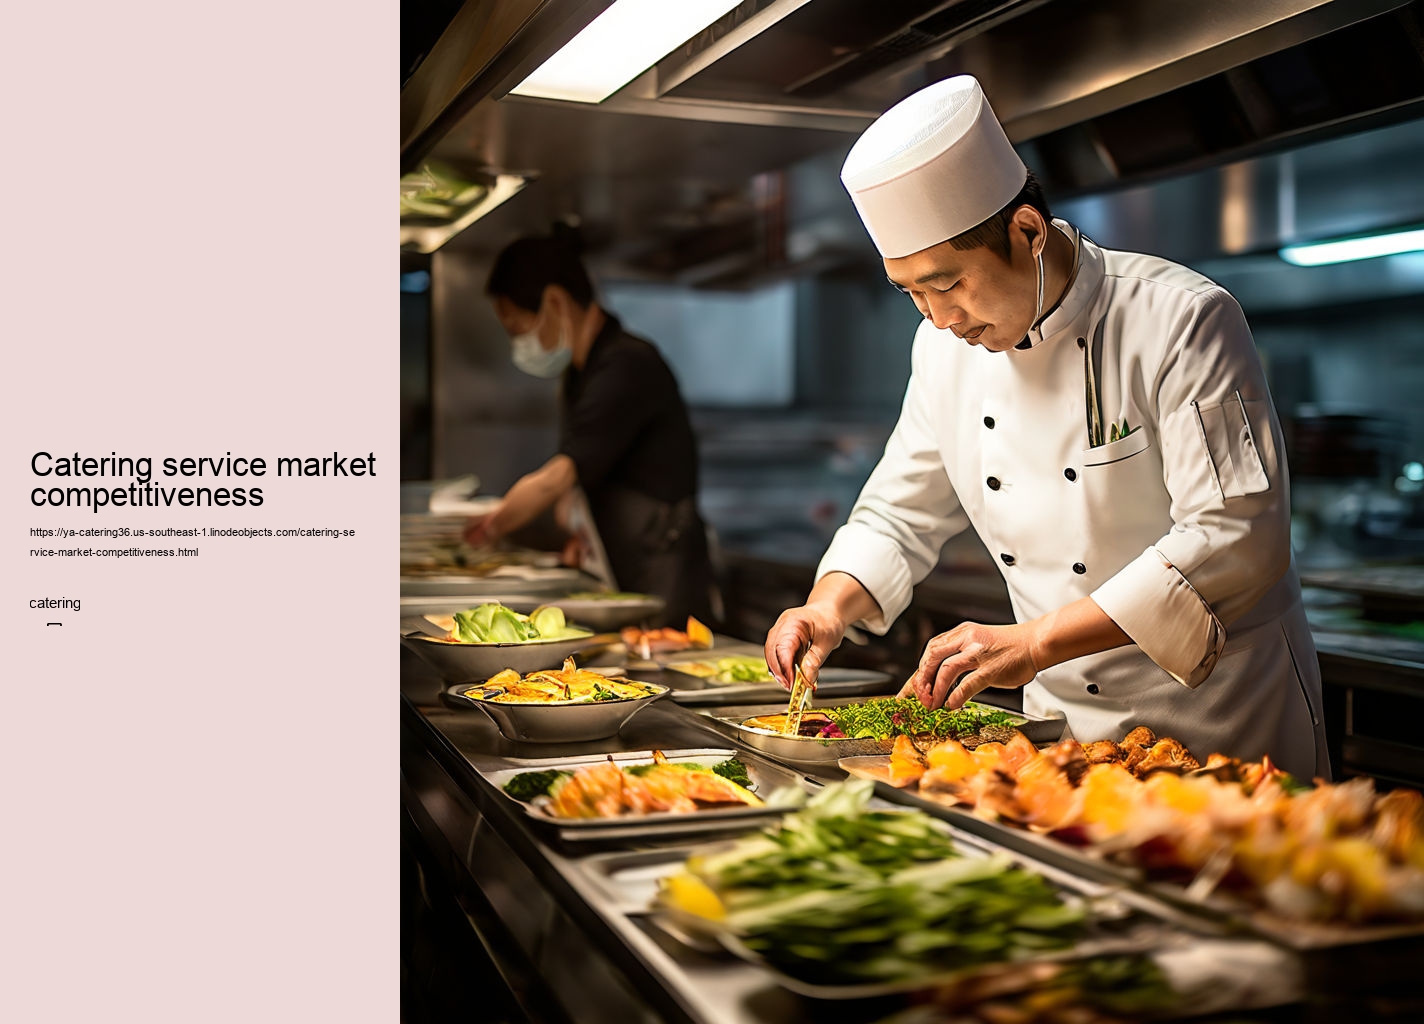 Catering service market competitiveness